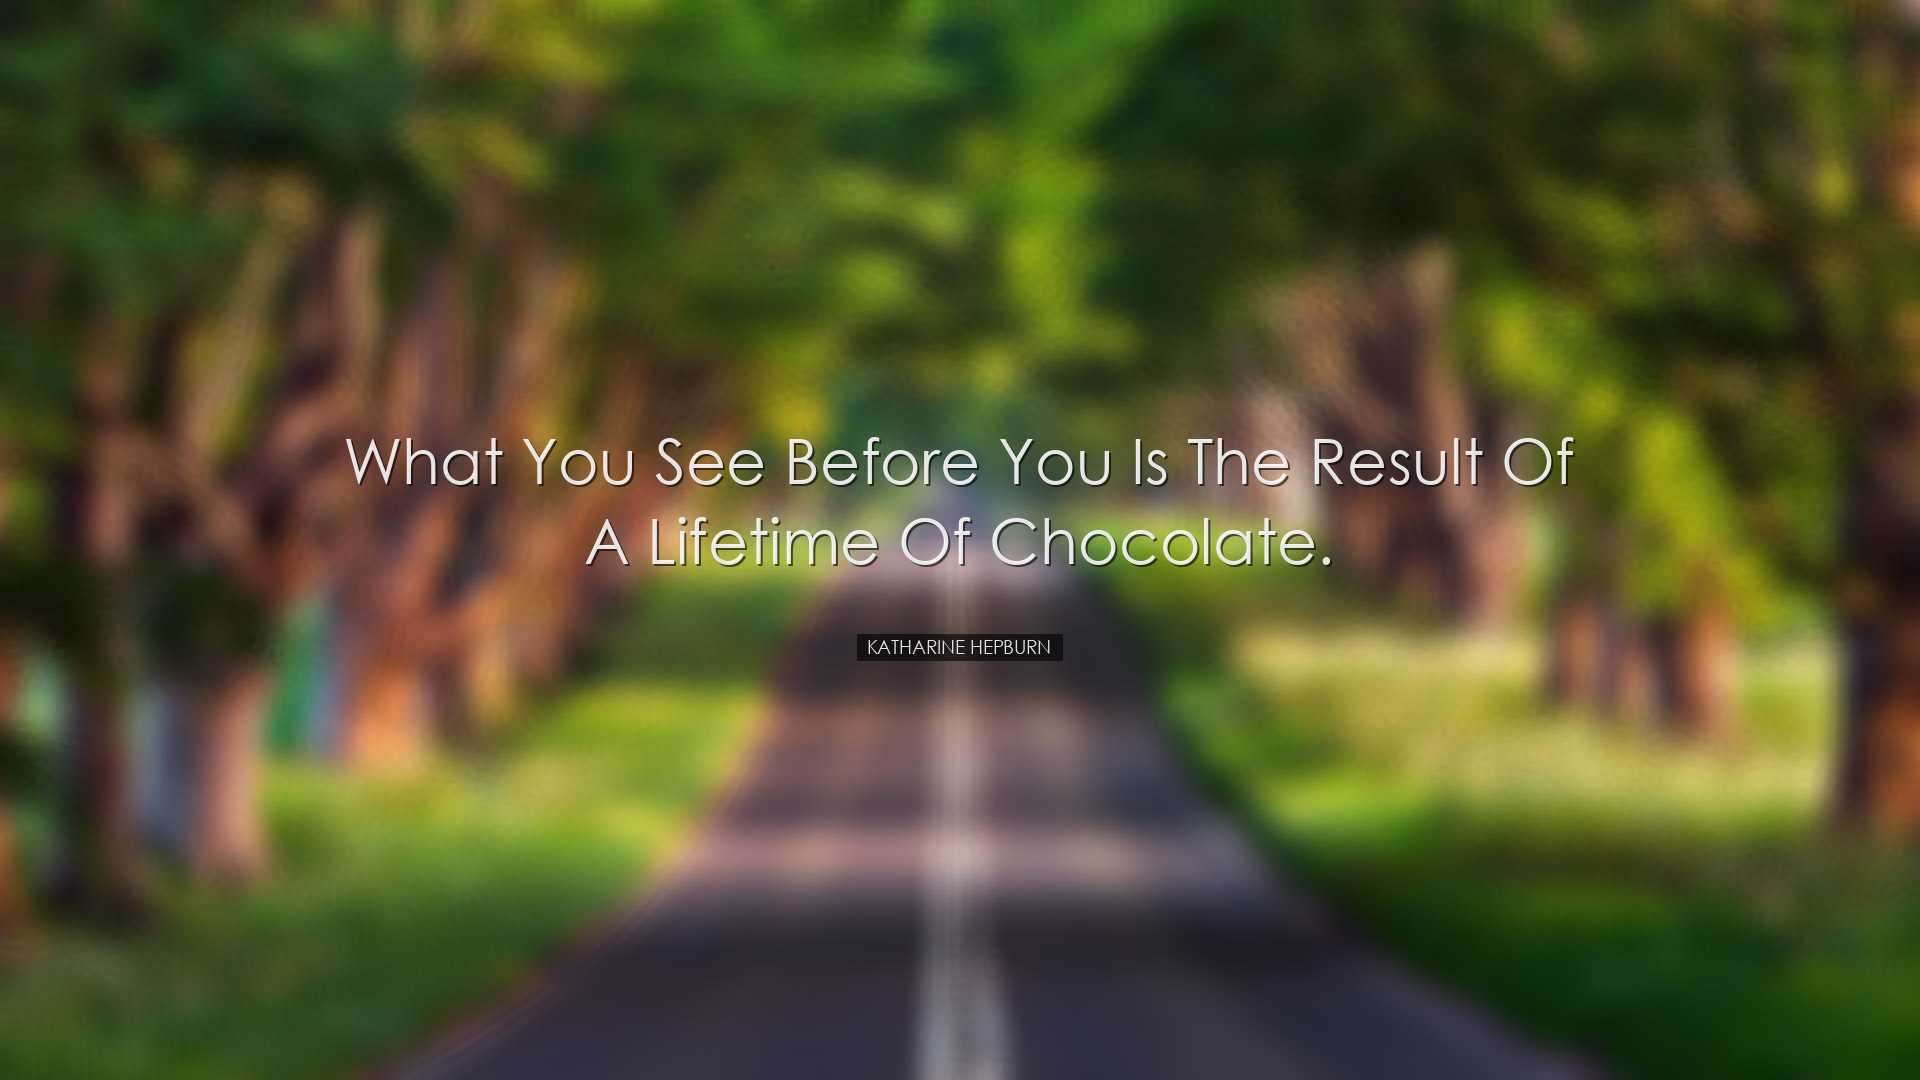 What you see before you is the result of a lifetime of chocolate.